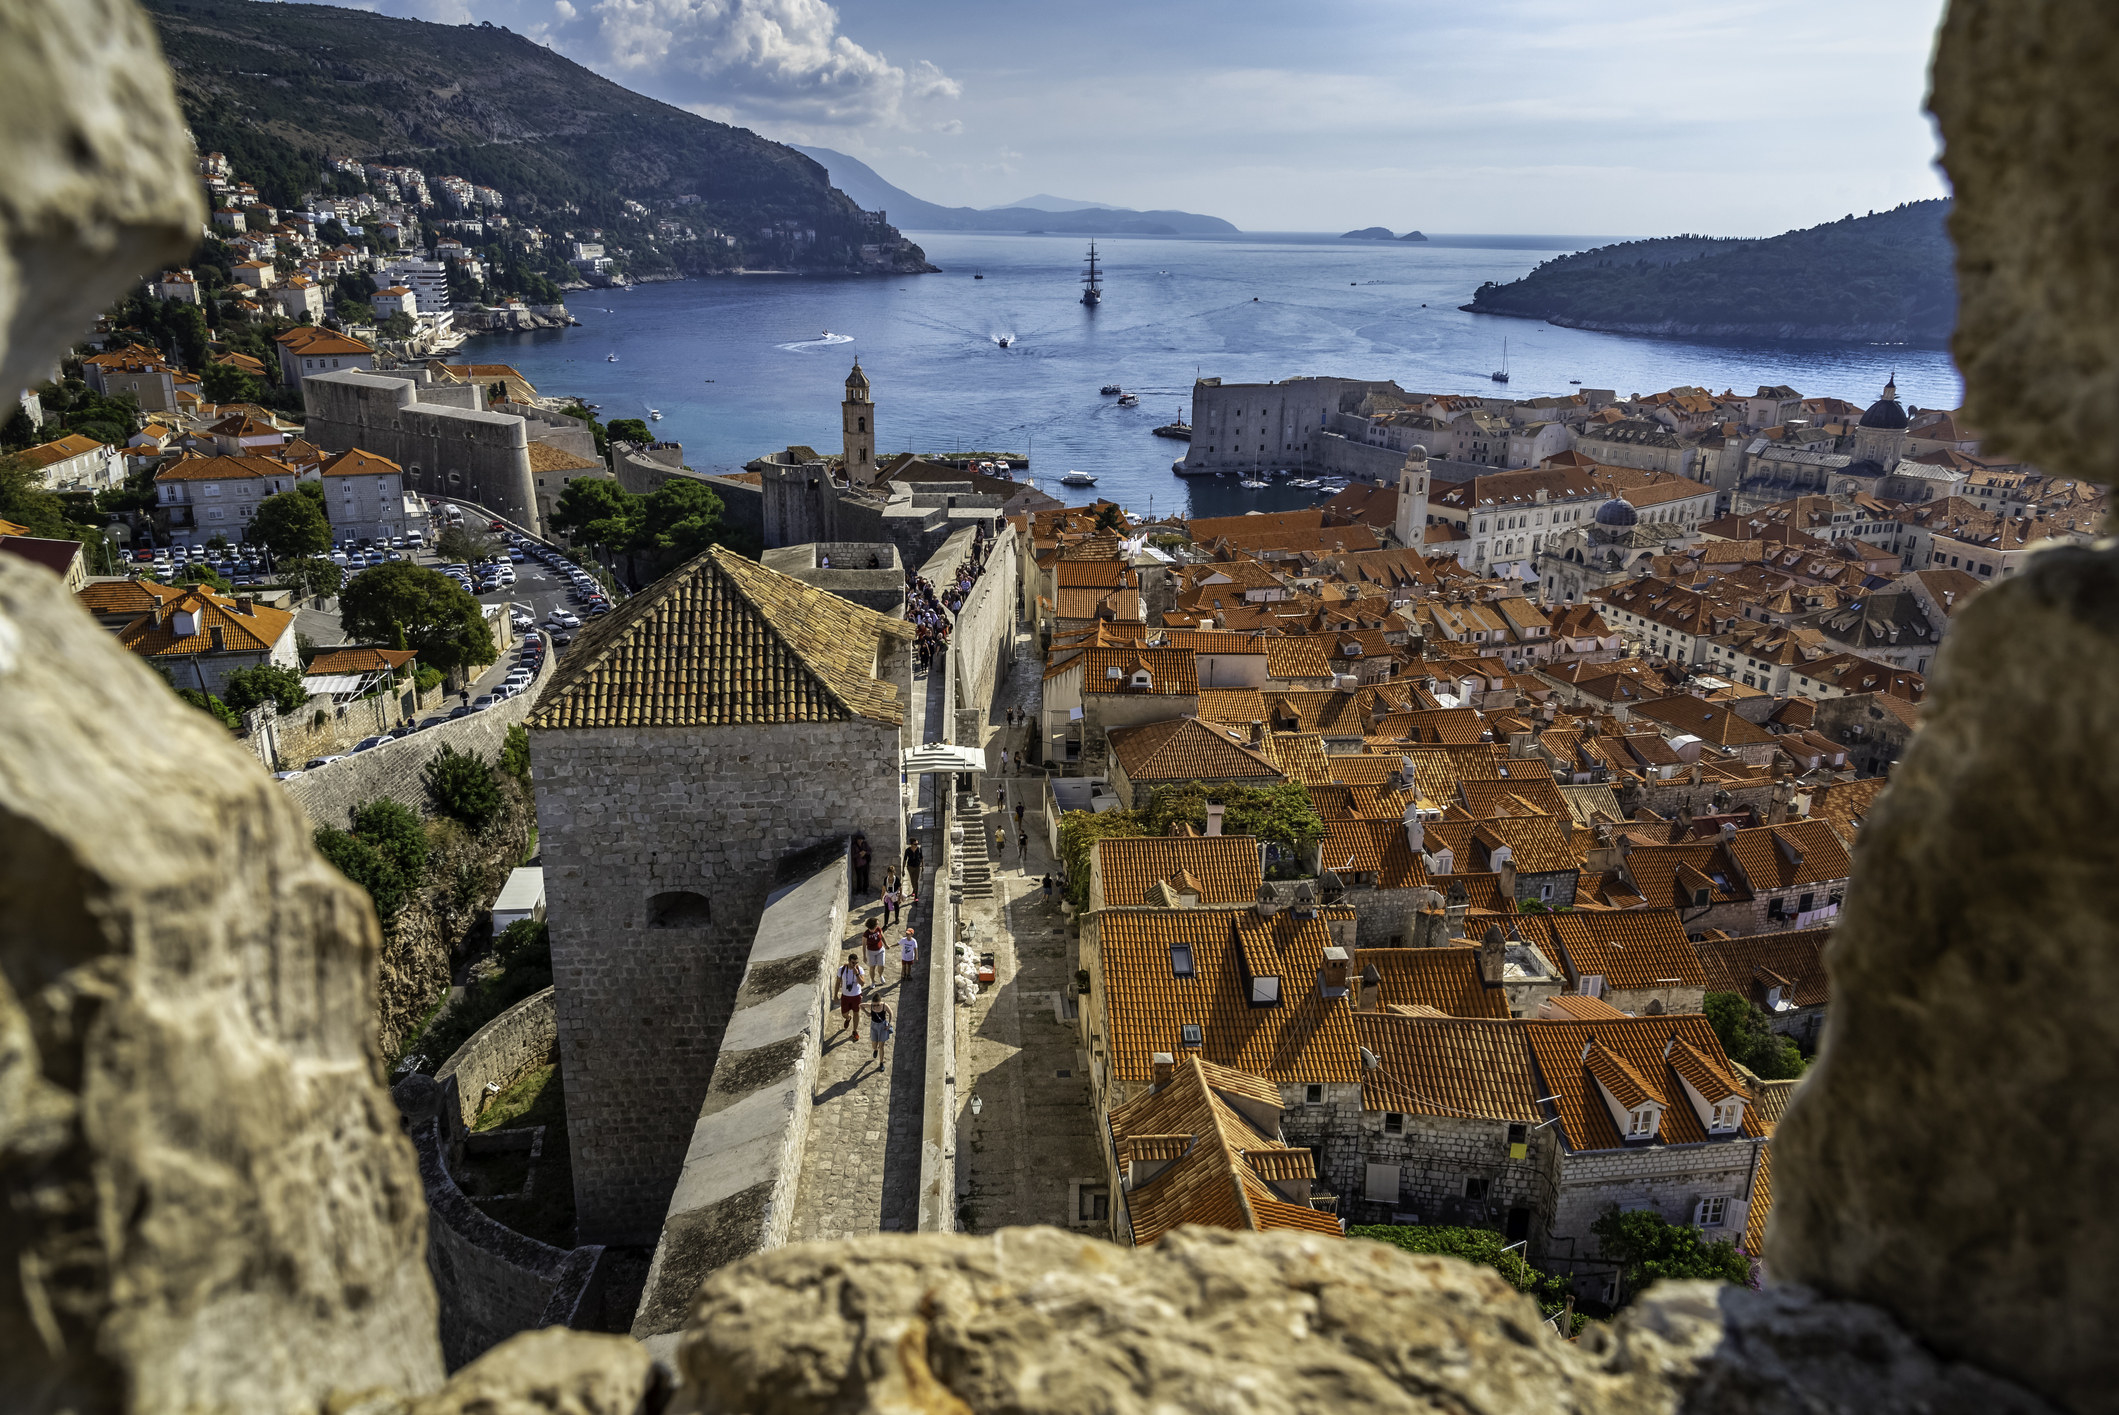 The city of Dubrovnik and a view of the Adriatic Sea.